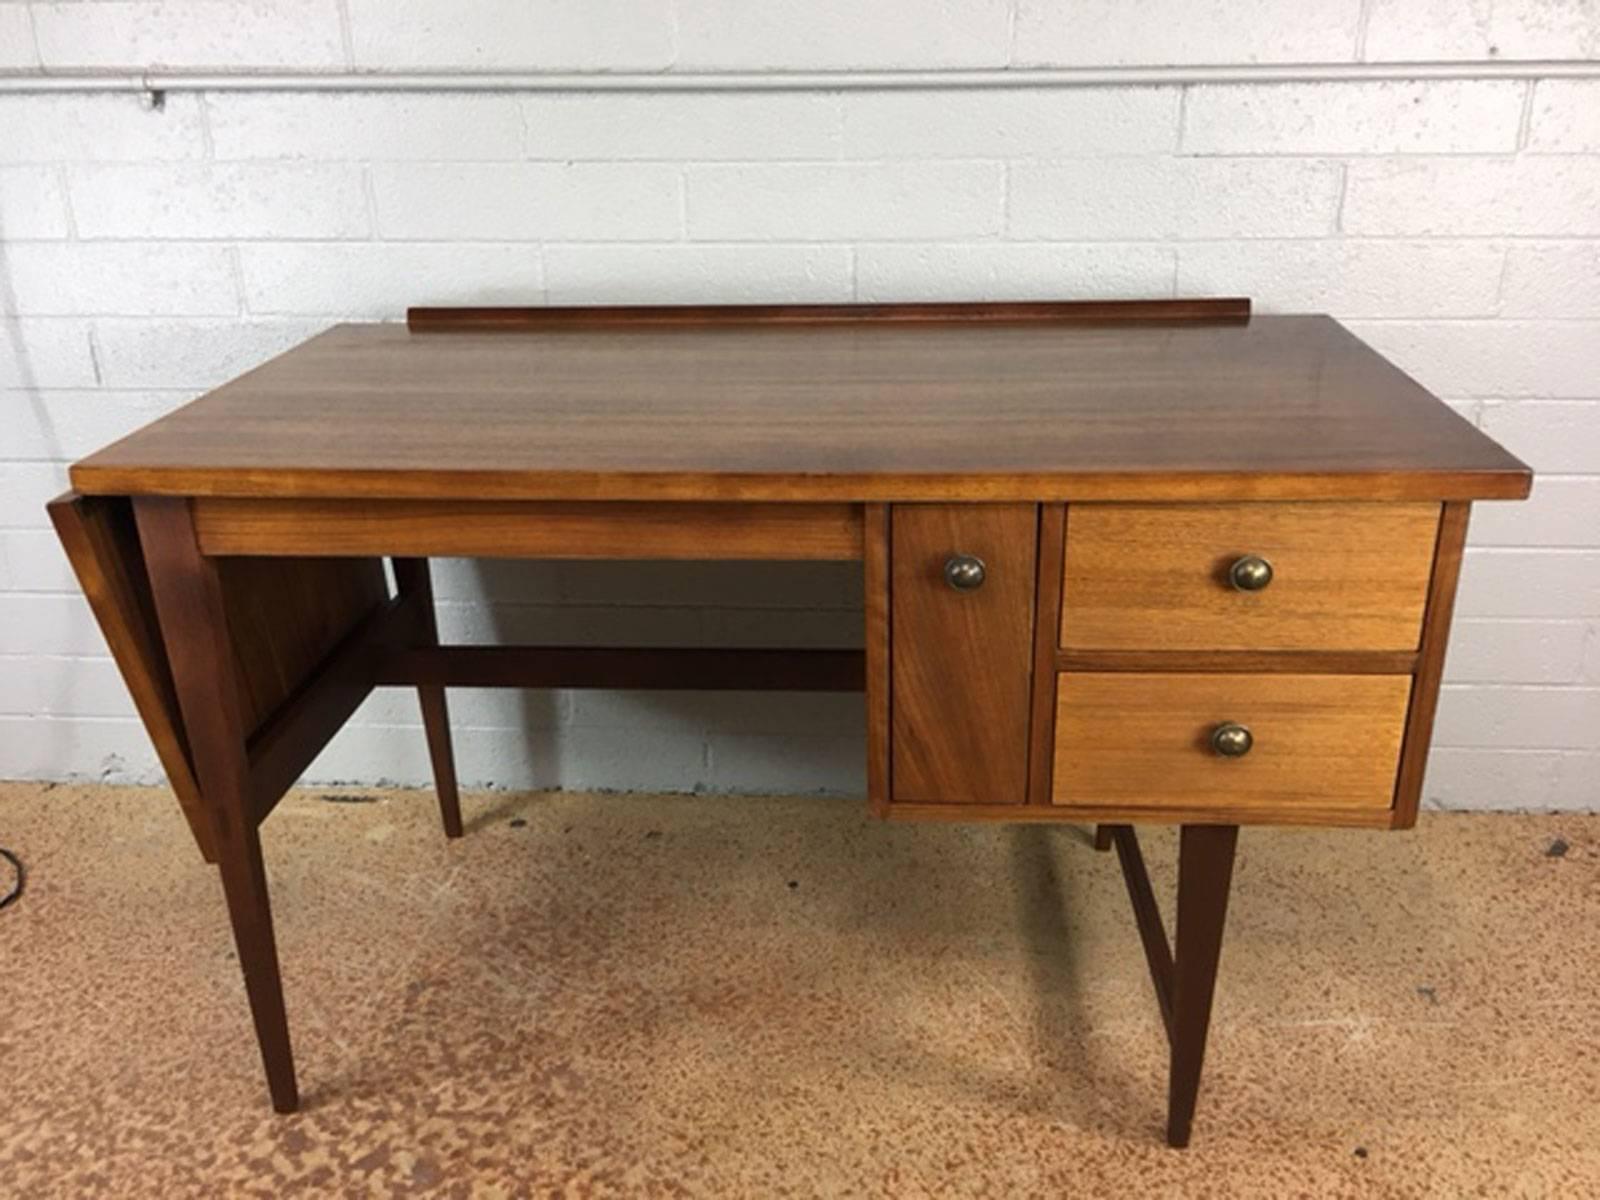 Unique drop leaf desk by Lane Altavista in walnut. Refinished. Clean lines. circa 1960s.Drop-leaf extends and adds another 16